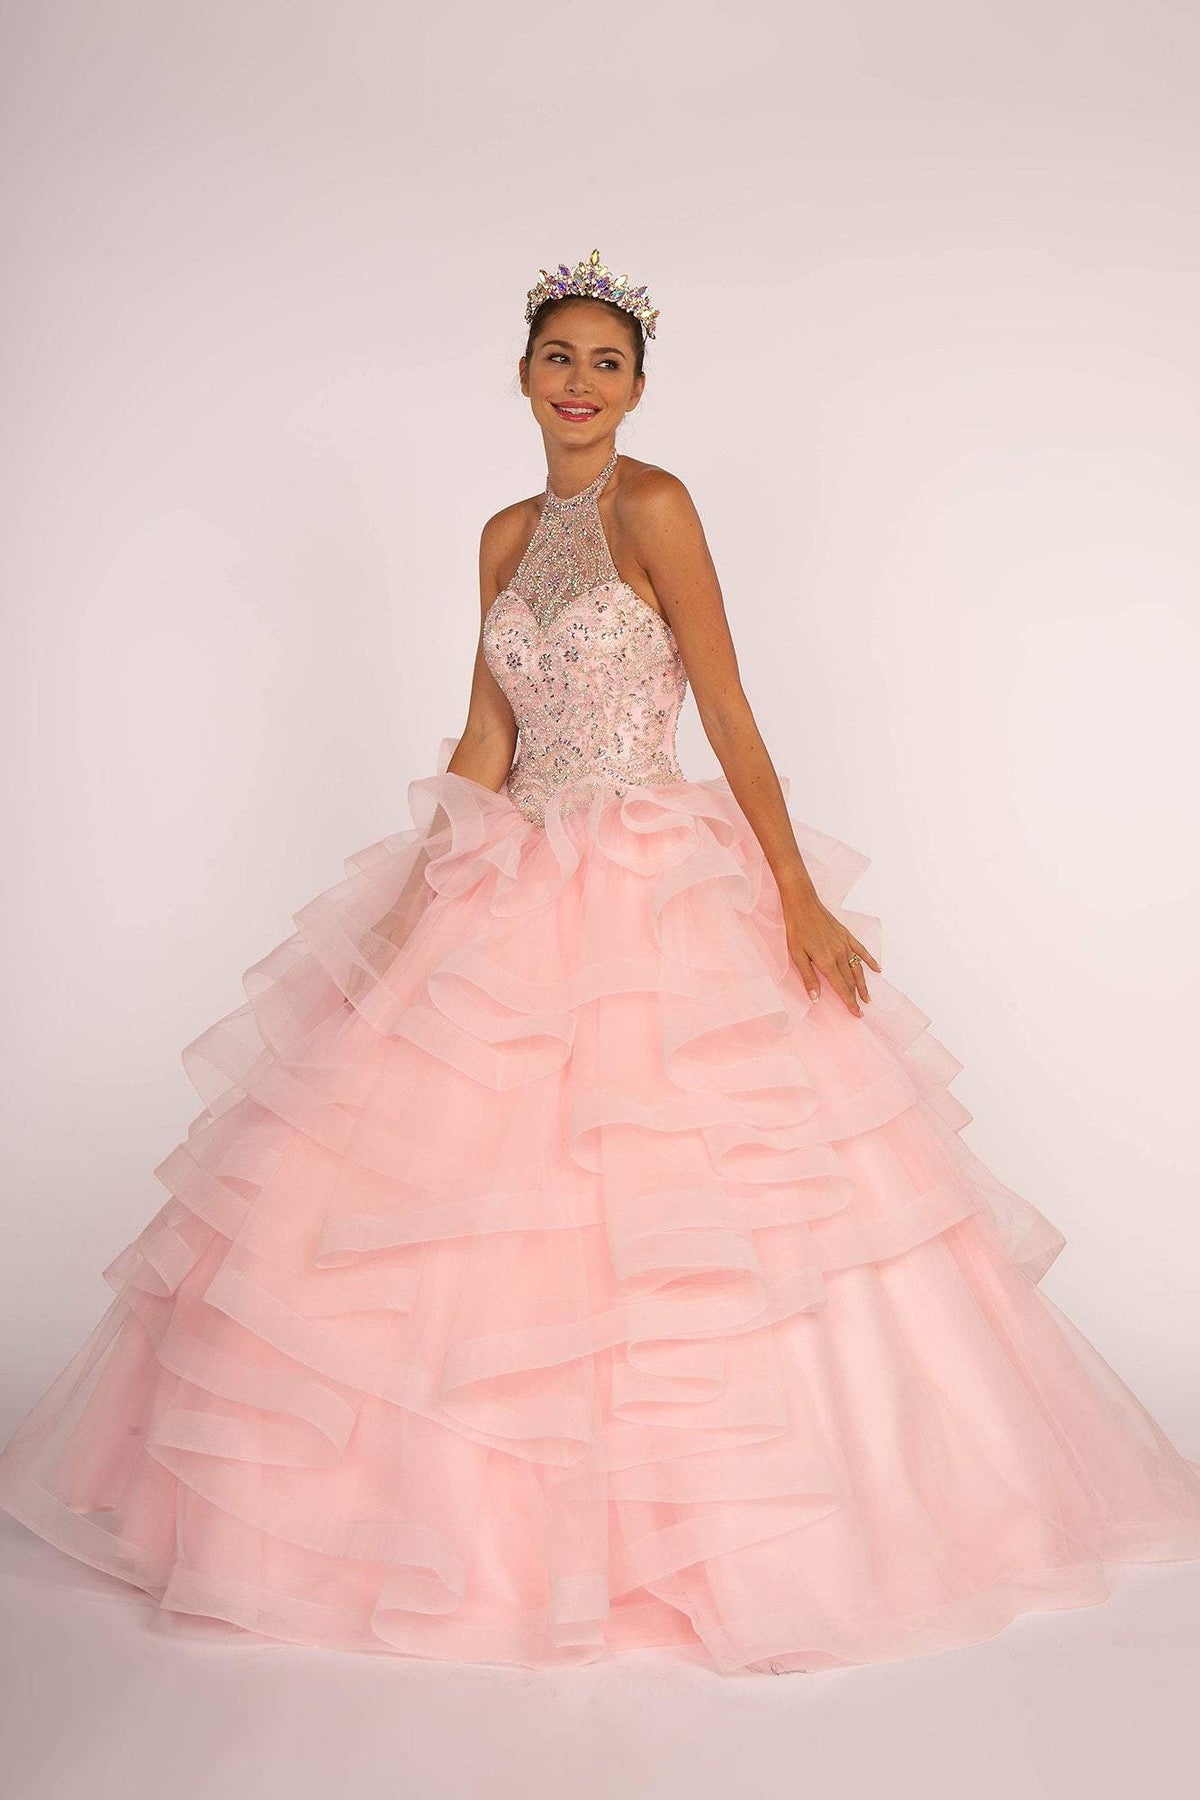 Elizabeth K - GL2512 Ornate Illusion High Halter Ruffled Ballgown Special Occasion Dress XS / Baby Pink